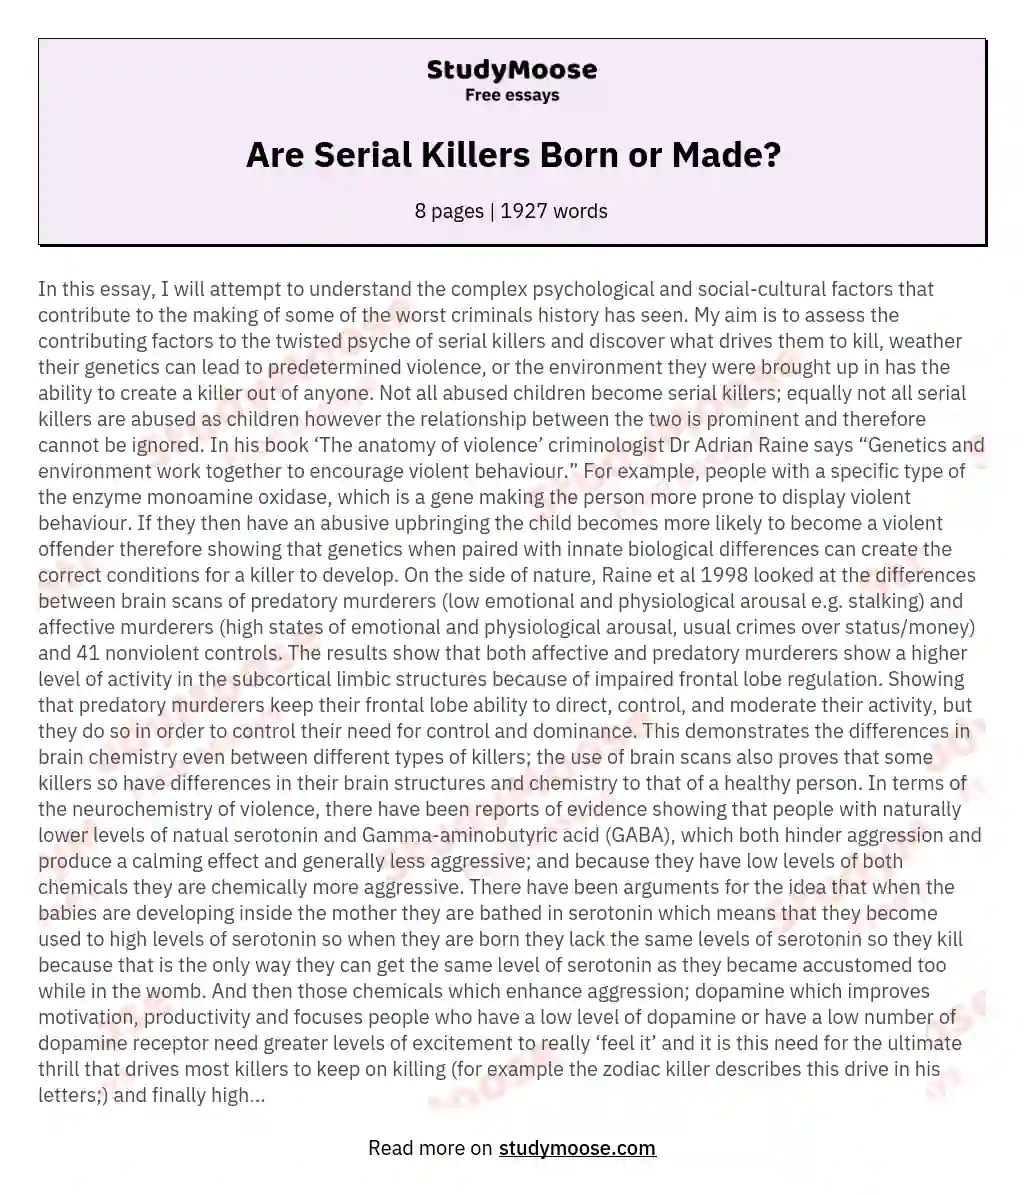 Are Serial Killers Born or Made?